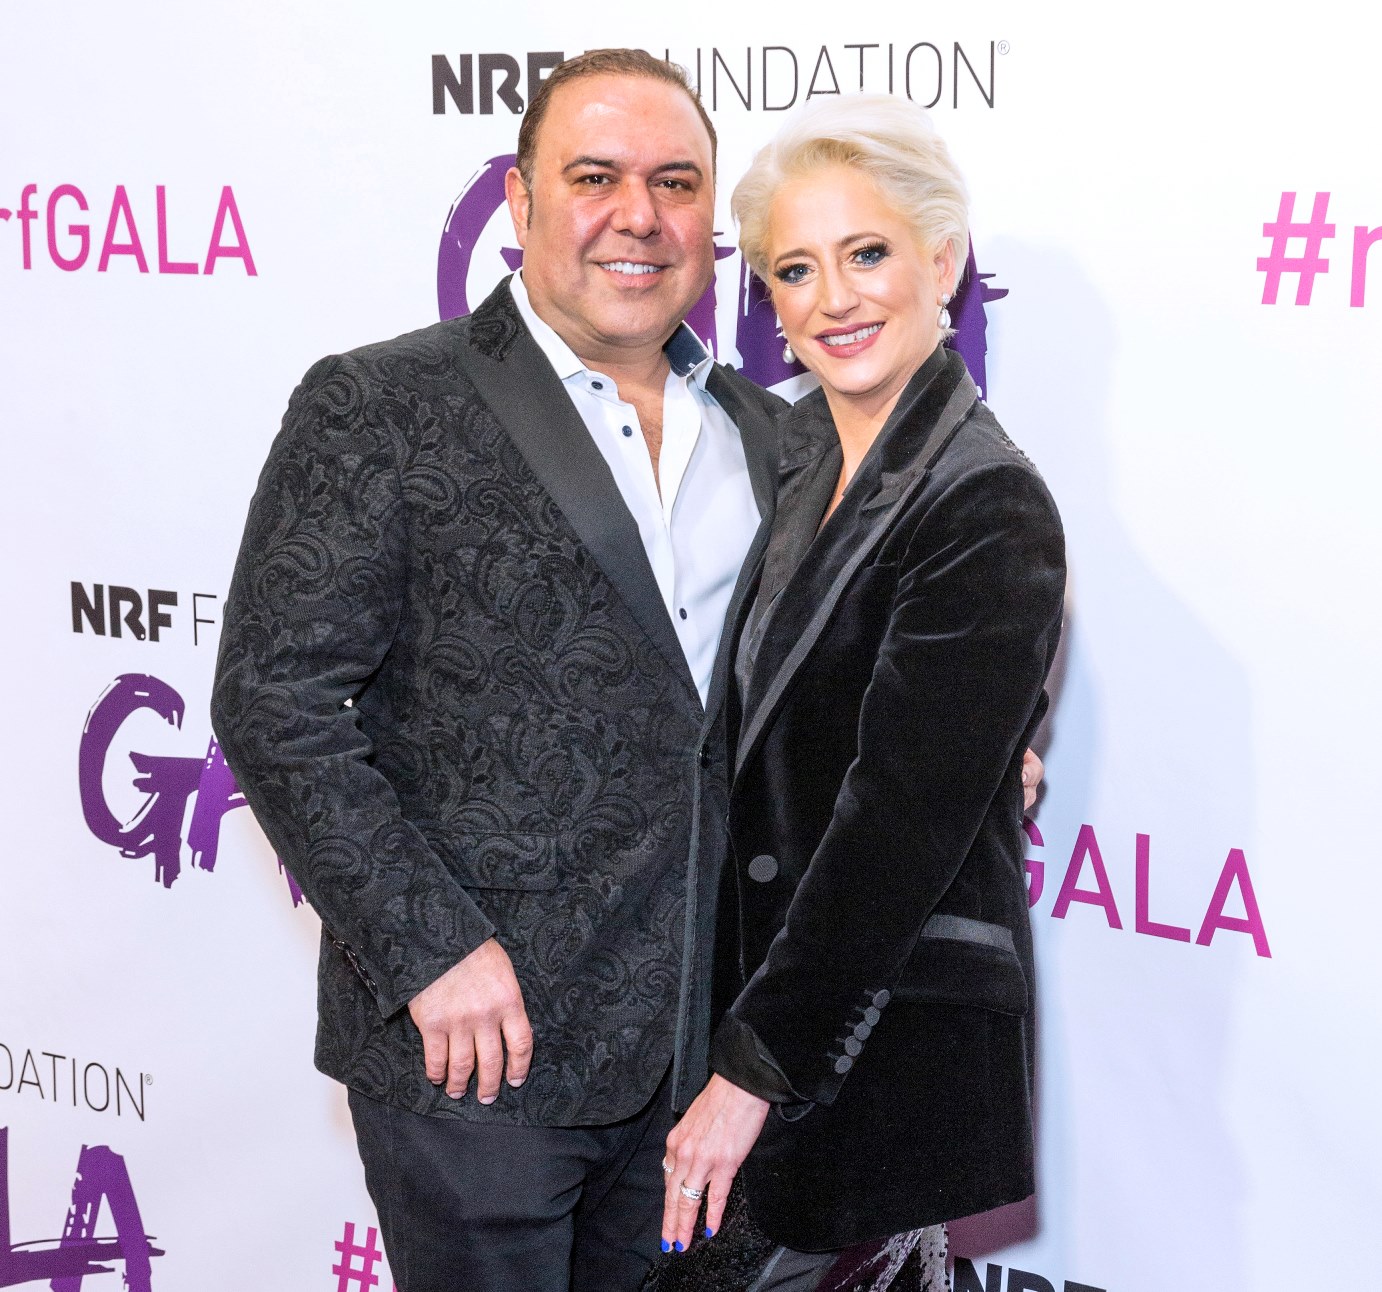 RHONY Star Dorinda Medley Opens Up About Splitting From Boyfriend John Mahdessian After Seven Years, Admits the Breakup Was "Terrible"